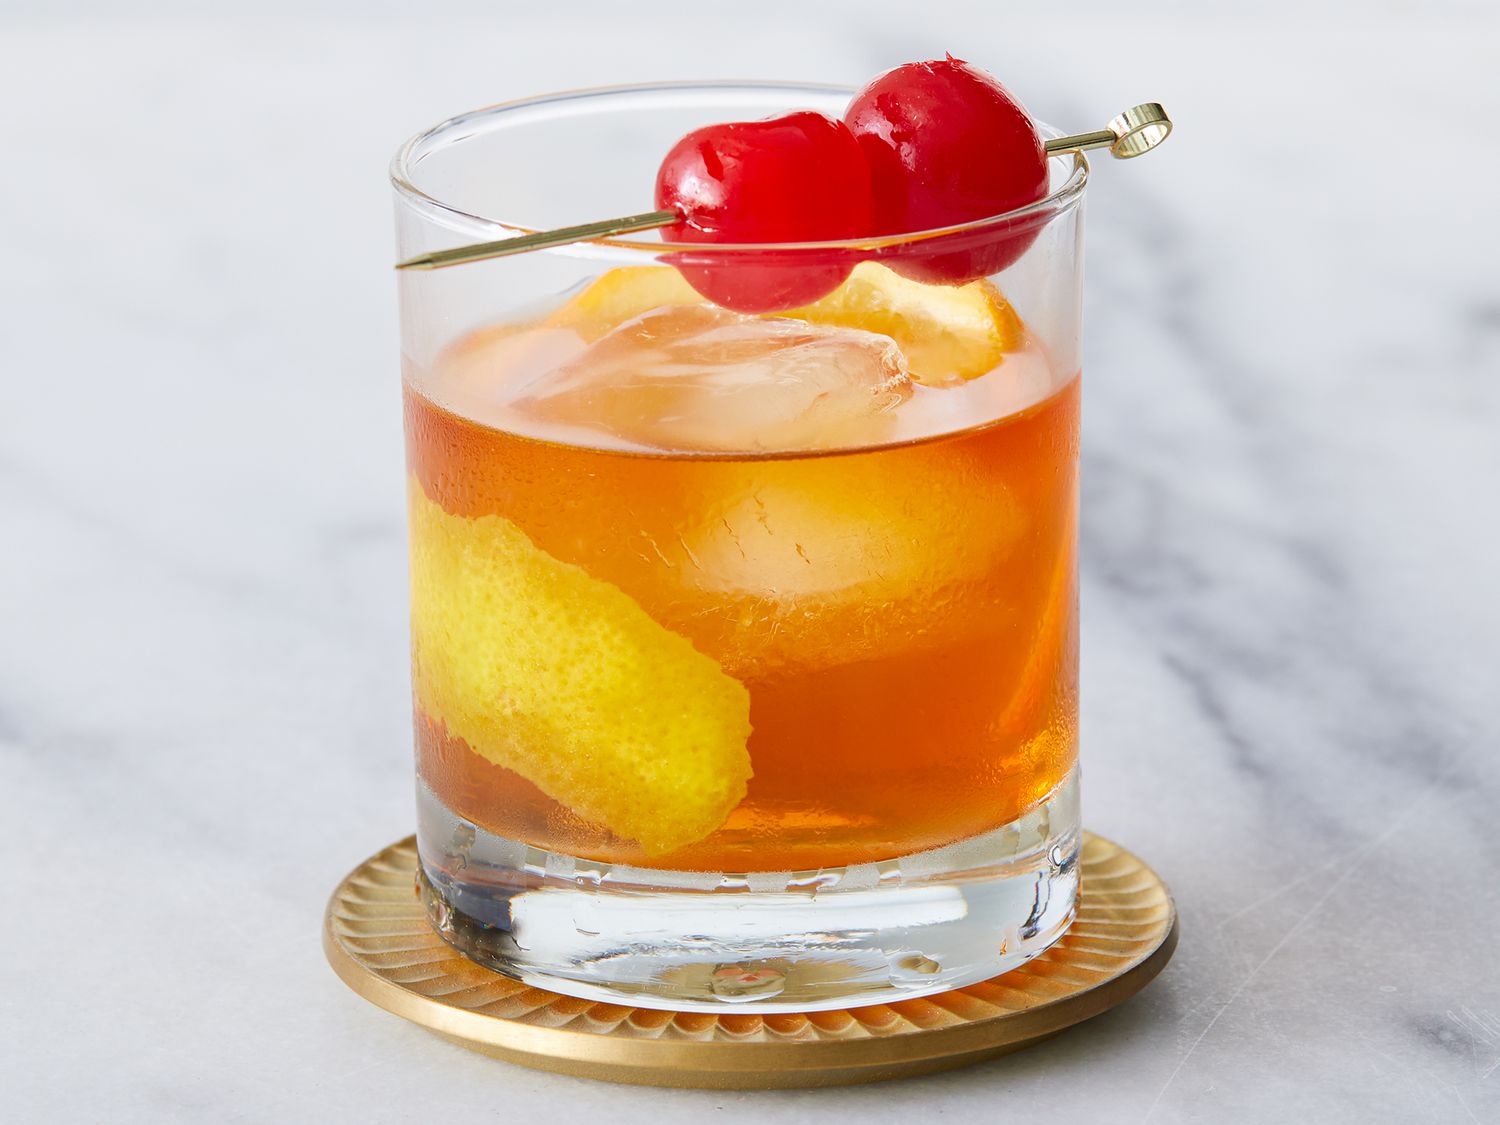 Close up on a glass of old fashioned cocktail garnished with maraschino cherries